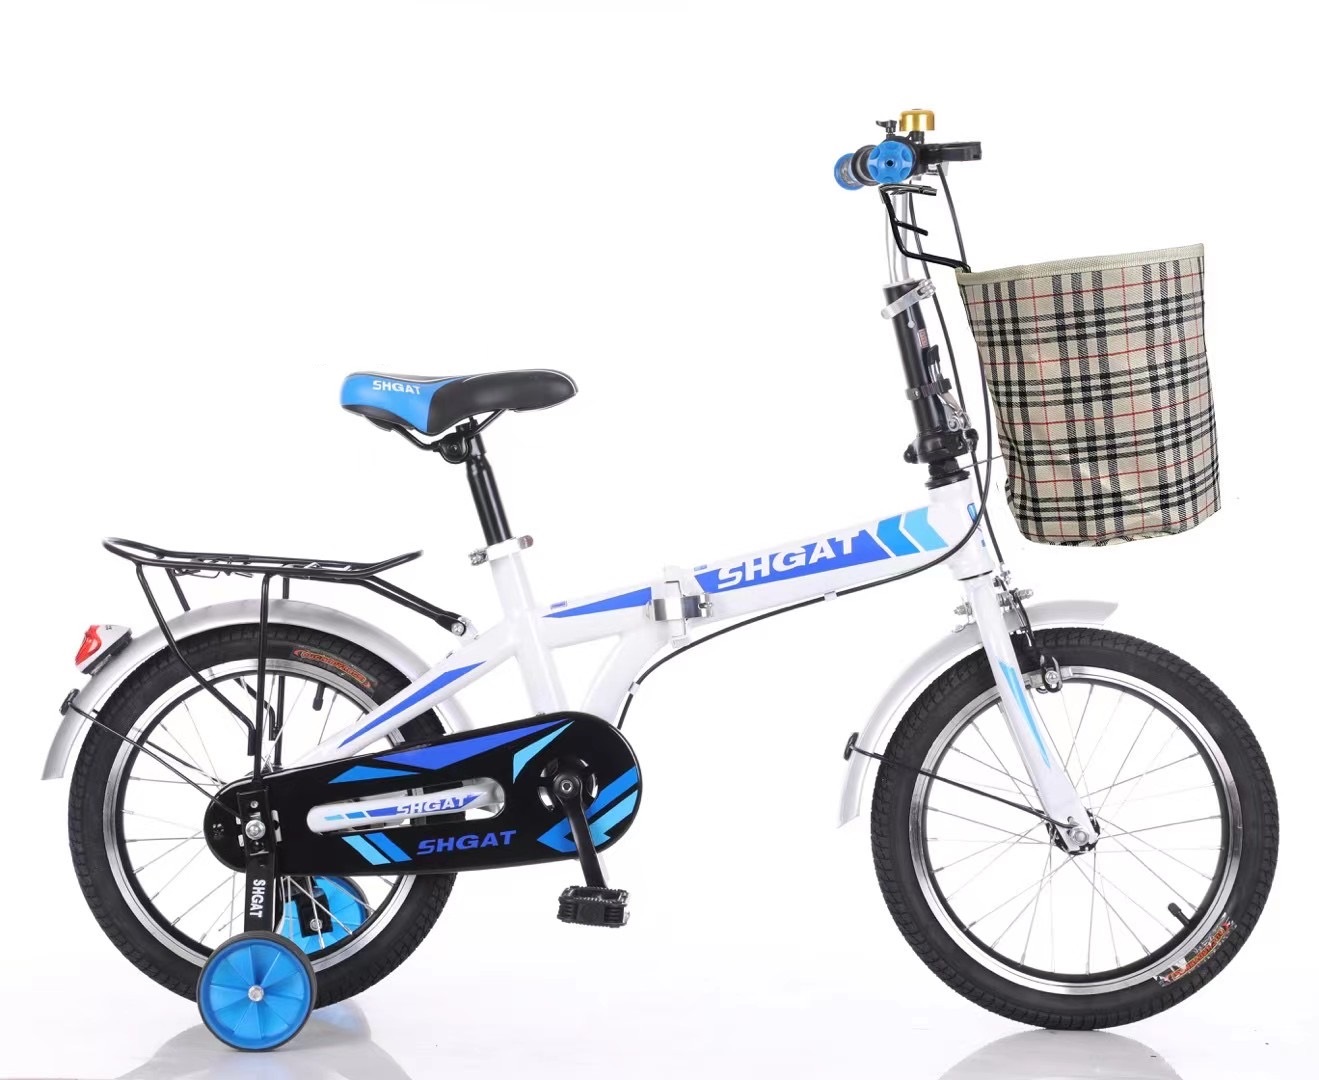 Super Lowest Price Buy Folding Bike - 2021 New Style Folding Bicycle,popular color – Beimudou